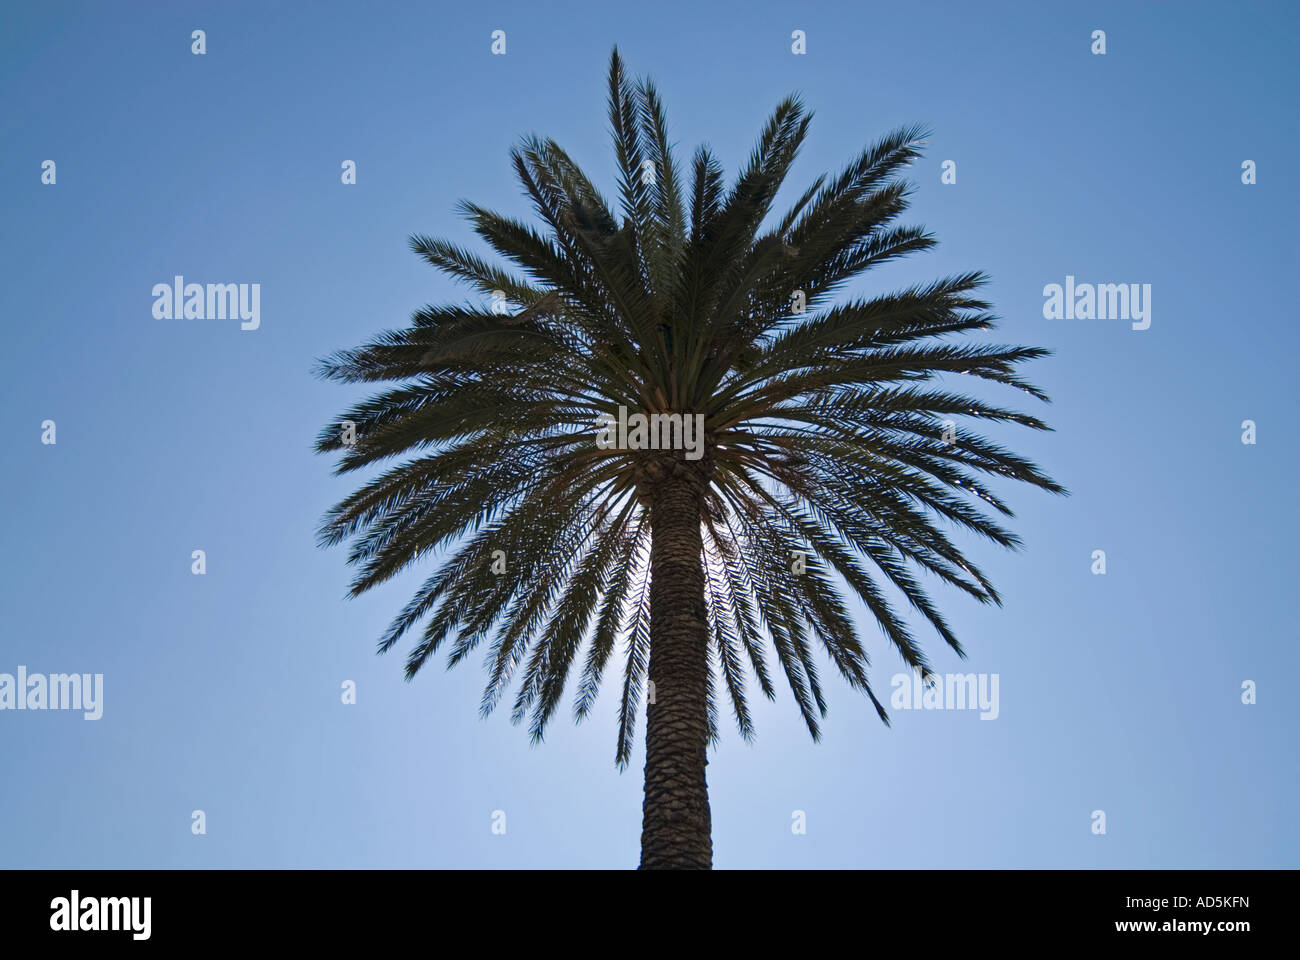 Horizontal view of a round palm tree 'palmae or palmaceae' with the sun shining behind, contre jour, against a bright blue sky Stock Photo